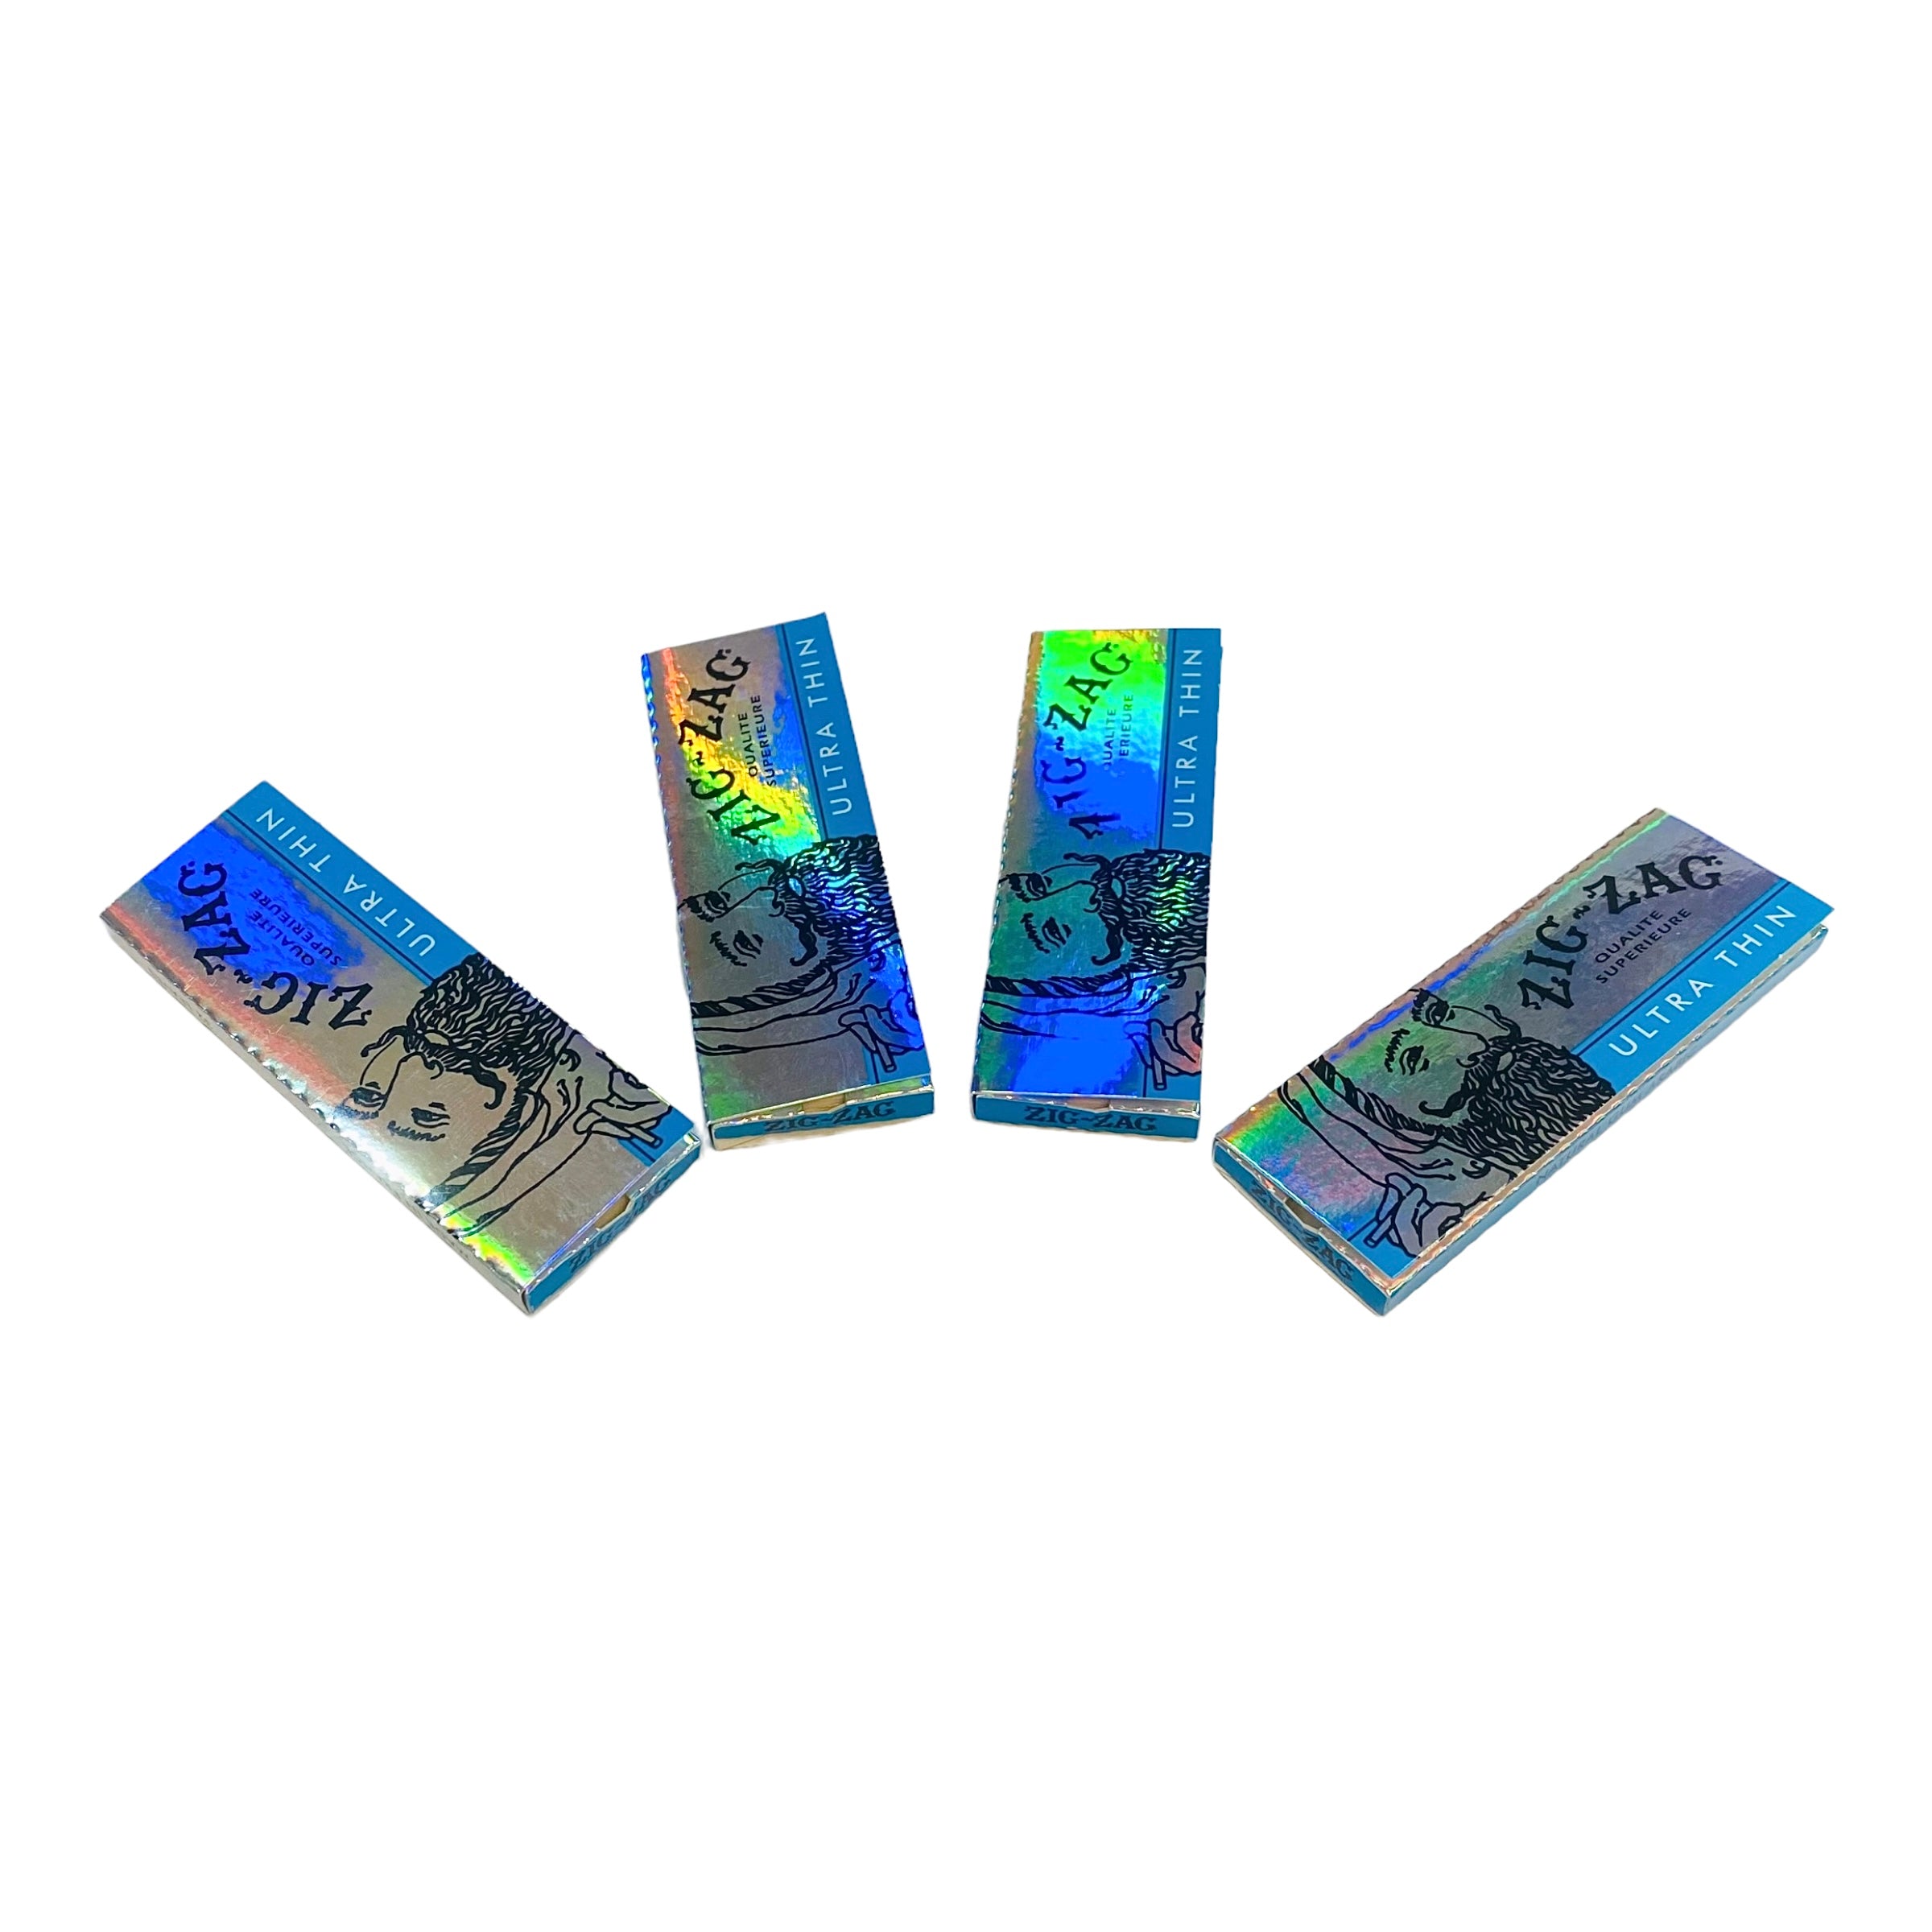 Zig Zag - Ultra Thin 1.25 Papers - 4 Packs